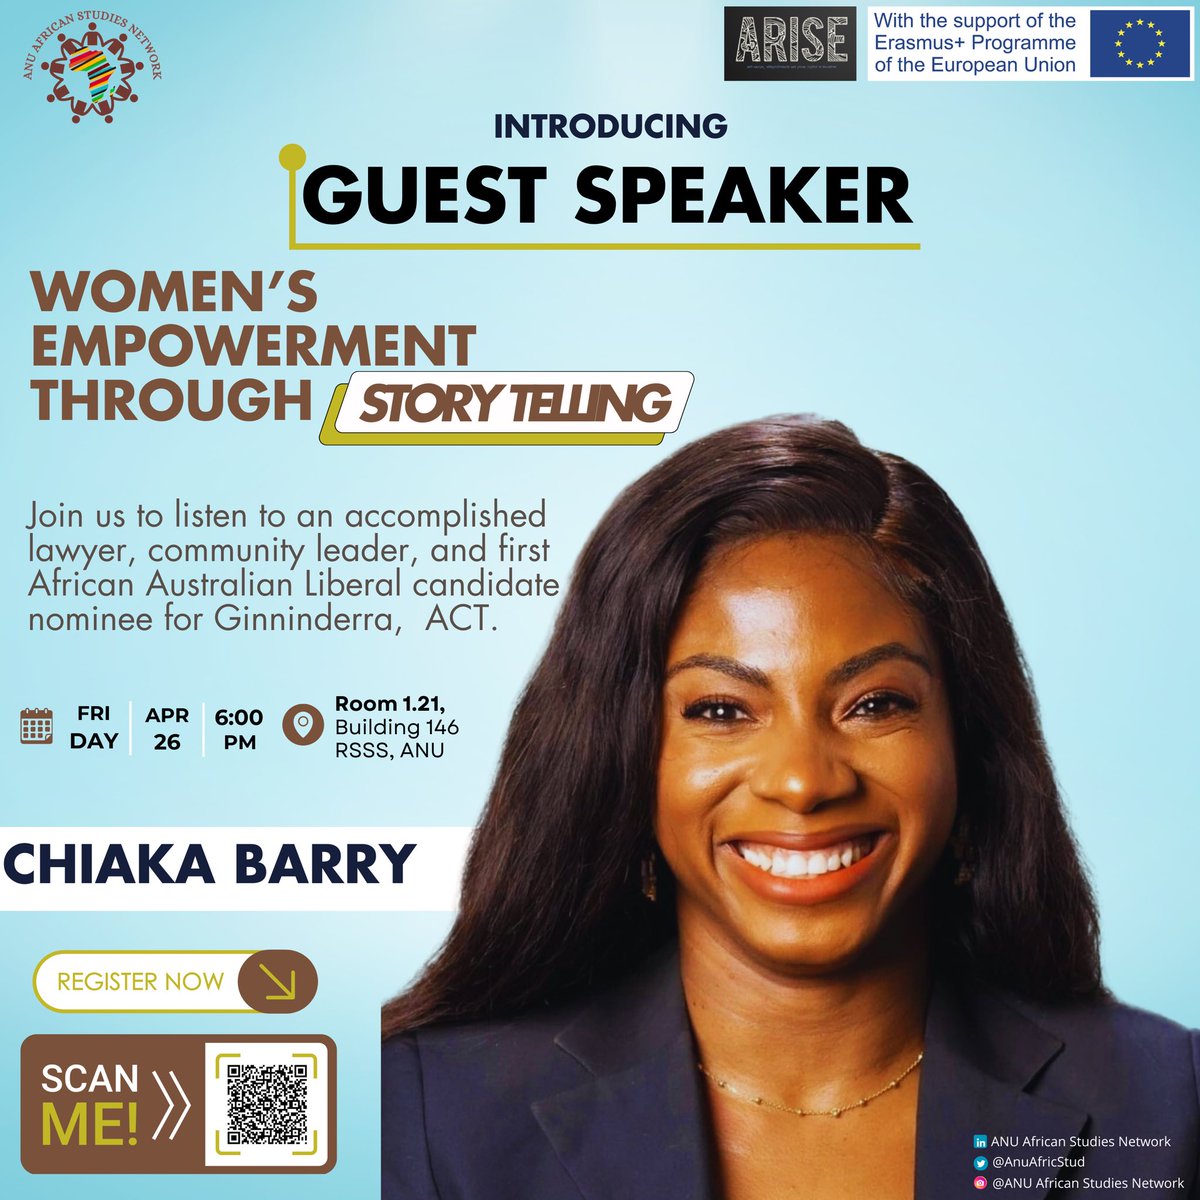 Join us next week on Friday, April 26, to listen to the stories of amazing African women and women of African descent of living and working in Australia. First on the list is #ChiakaBarry. More about her:🔗 linkedin.com/in/chiaka-barr… #ANU #Africa #Women